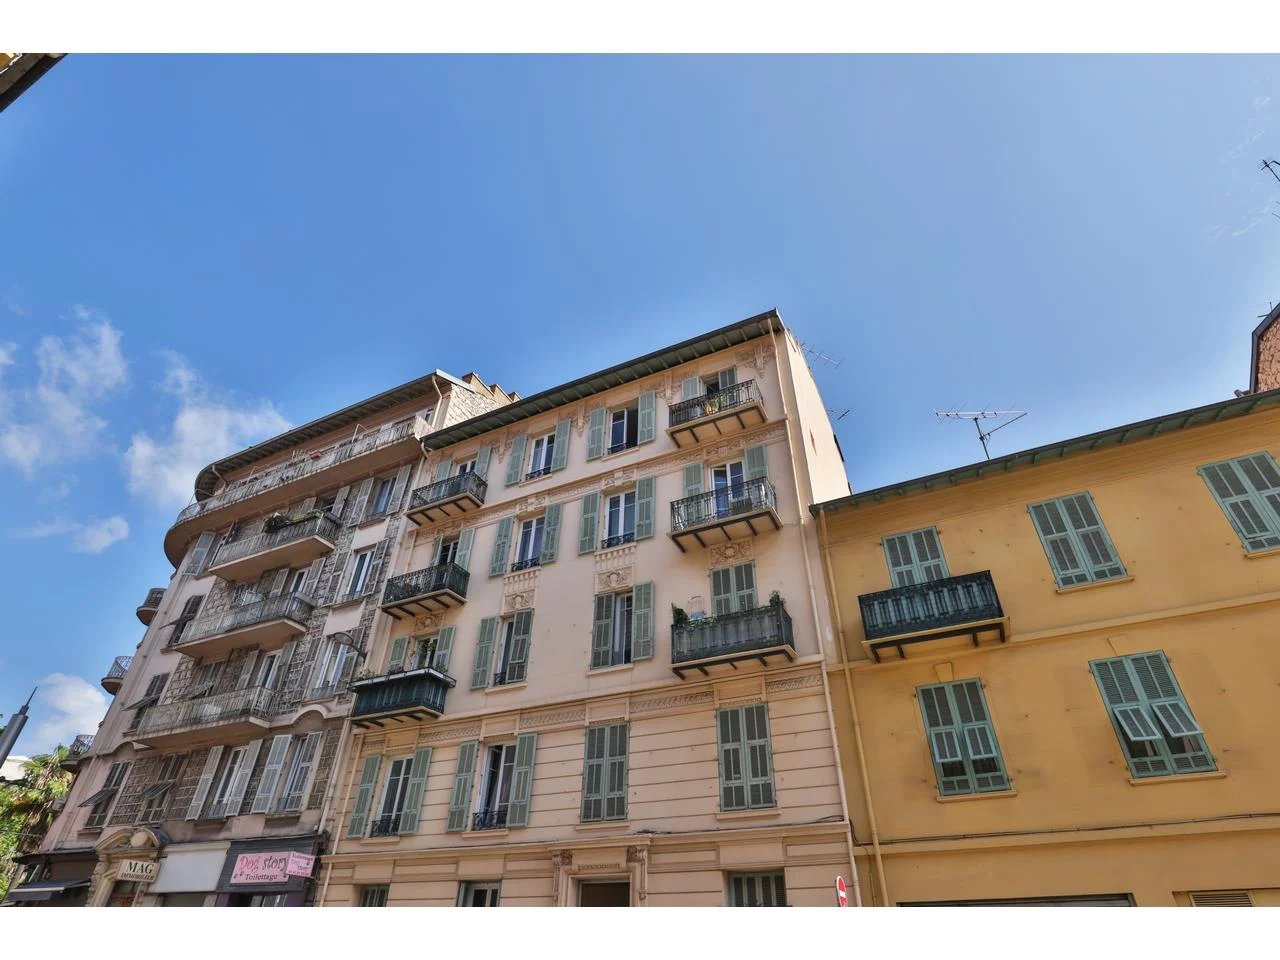 Appartement  2 Rooms 42.12m2  for sale   240 000 €